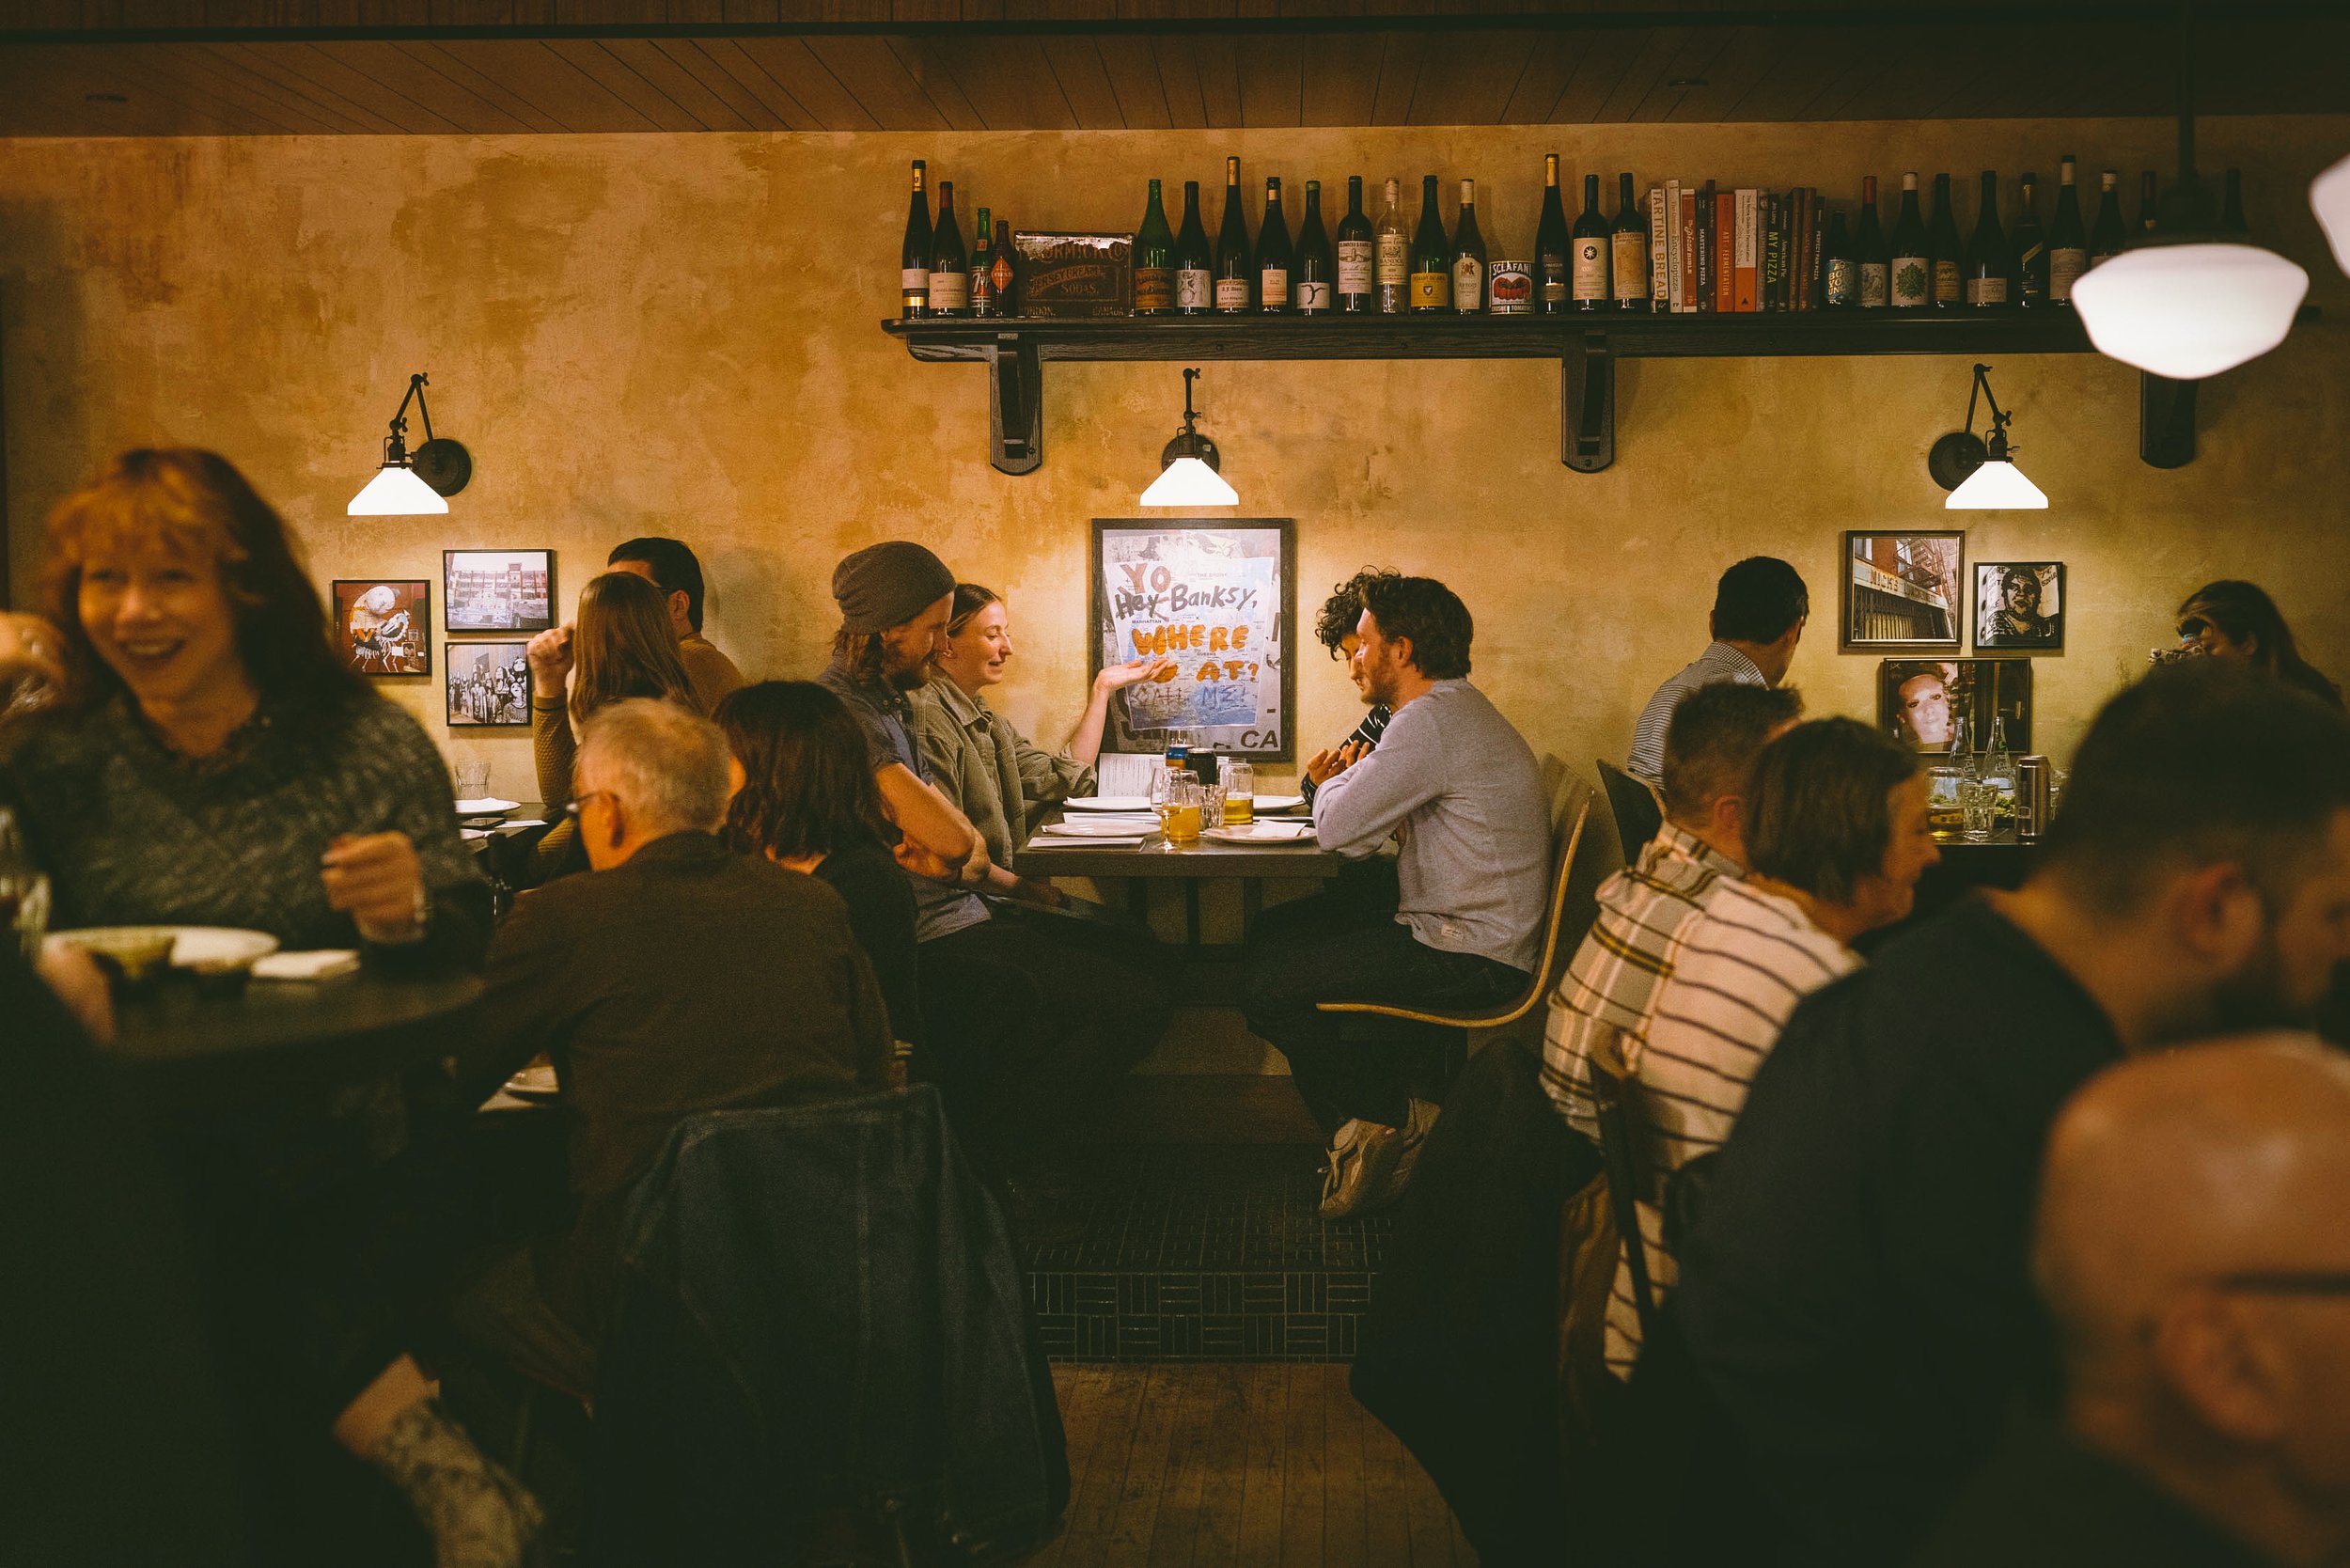 People dine at small tables inside a dimly lit restaurant with a shelf of bottles overhead